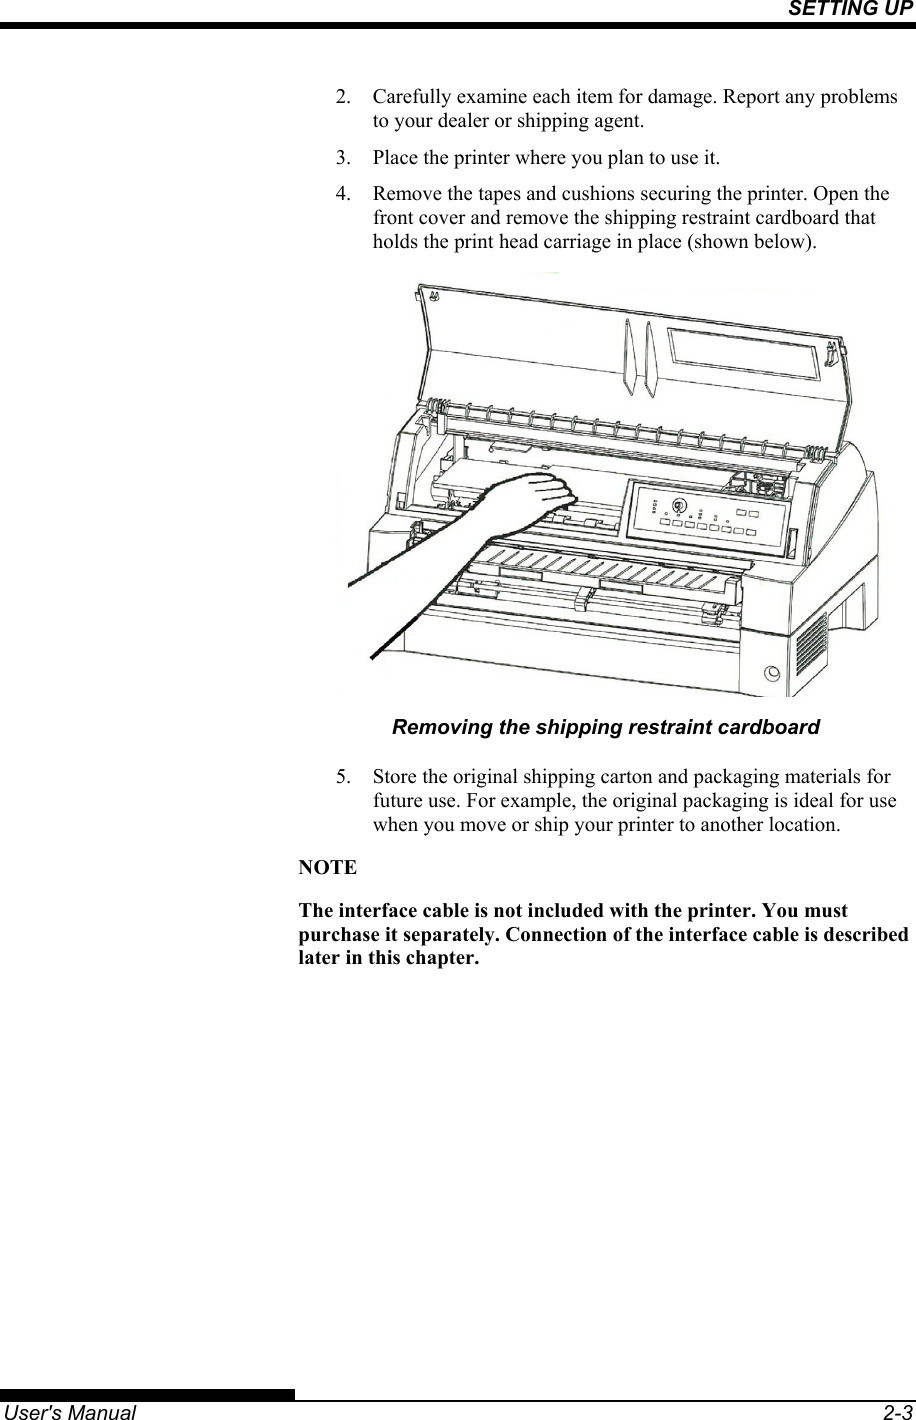 SETTING UP   User&apos;s Manual  2-3 2.  Carefully examine each item for damage. Report any problems to your dealer or shipping agent. 3.  Place the printer where you plan to use it. 4.  Remove the tapes and cushions securing the printer. Open the front cover and remove the shipping restraint cardboard that holds the print head carriage in place (shown below).  Removing the shipping restraint cardboard 5.  Store the original shipping carton and packaging materials for future use. For example, the original packaging is ideal for use when you move or ship your printer to another location. NOTE The interface cable is not included with the printer. You must purchase it separately. Connection of the interface cable is described later in this chapter.  